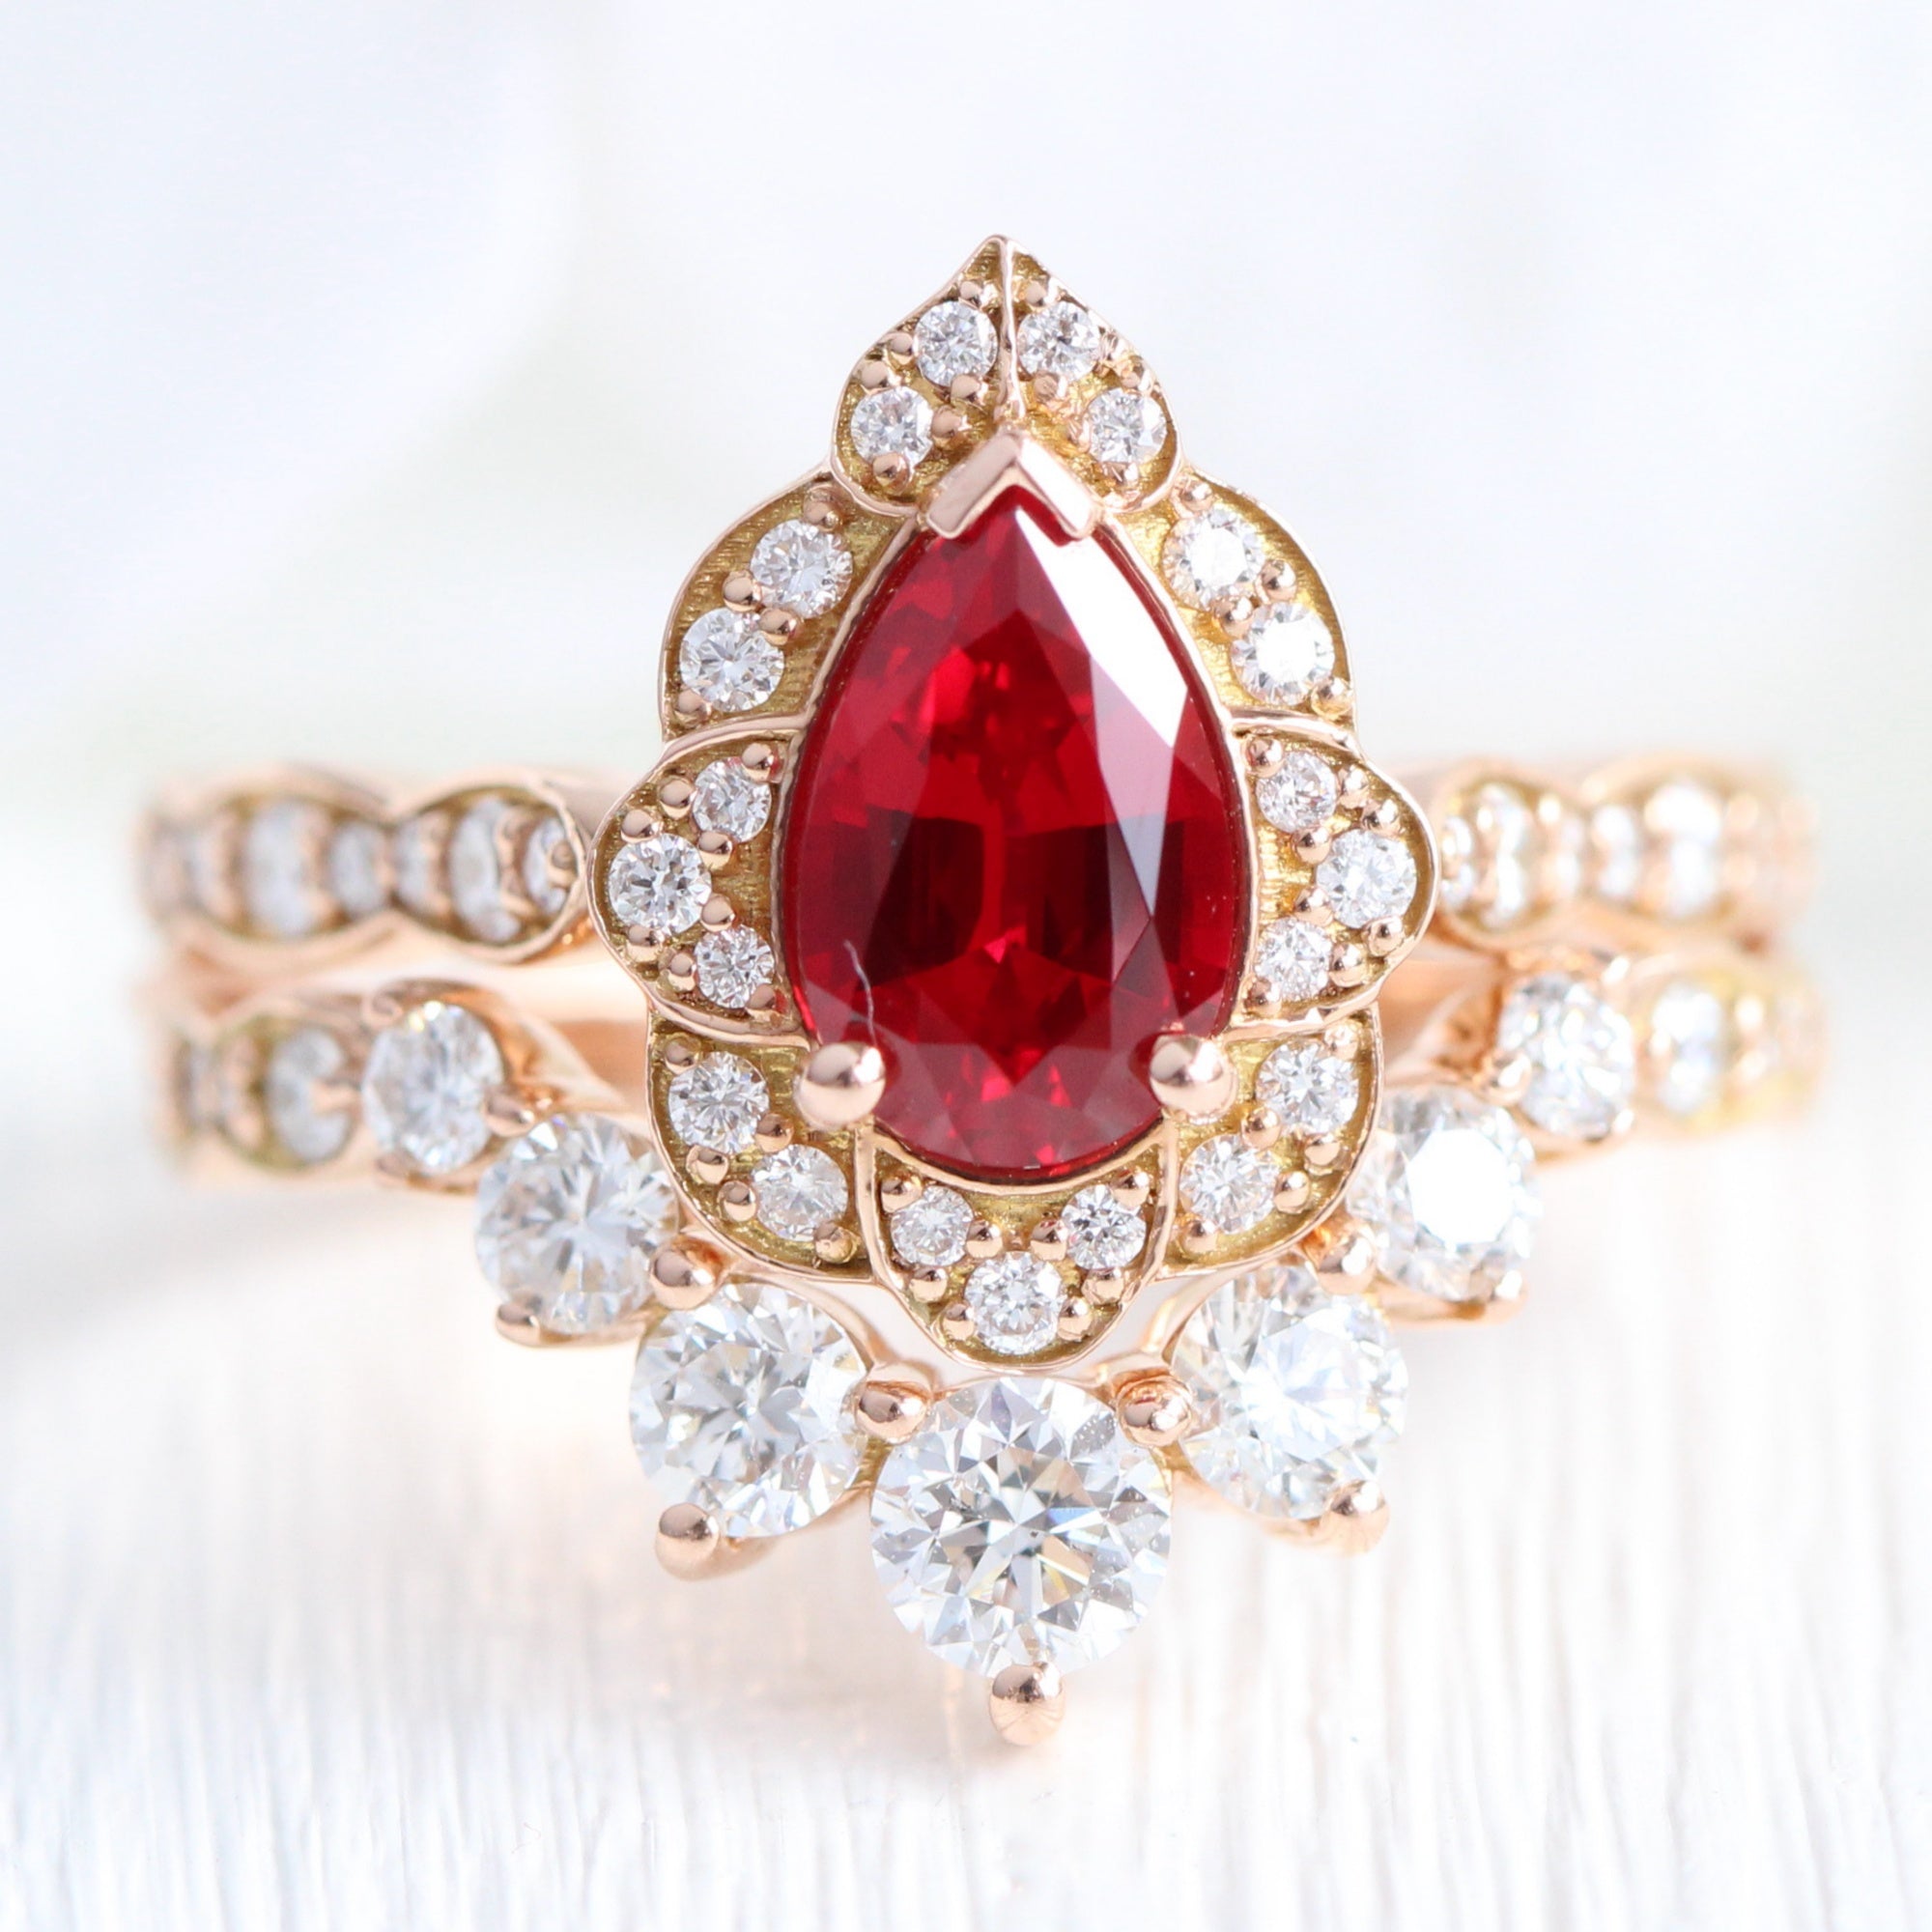 vintage halo diamond pear ruby ring stack rose gold curved diamond wedding band la more design jewelry-1